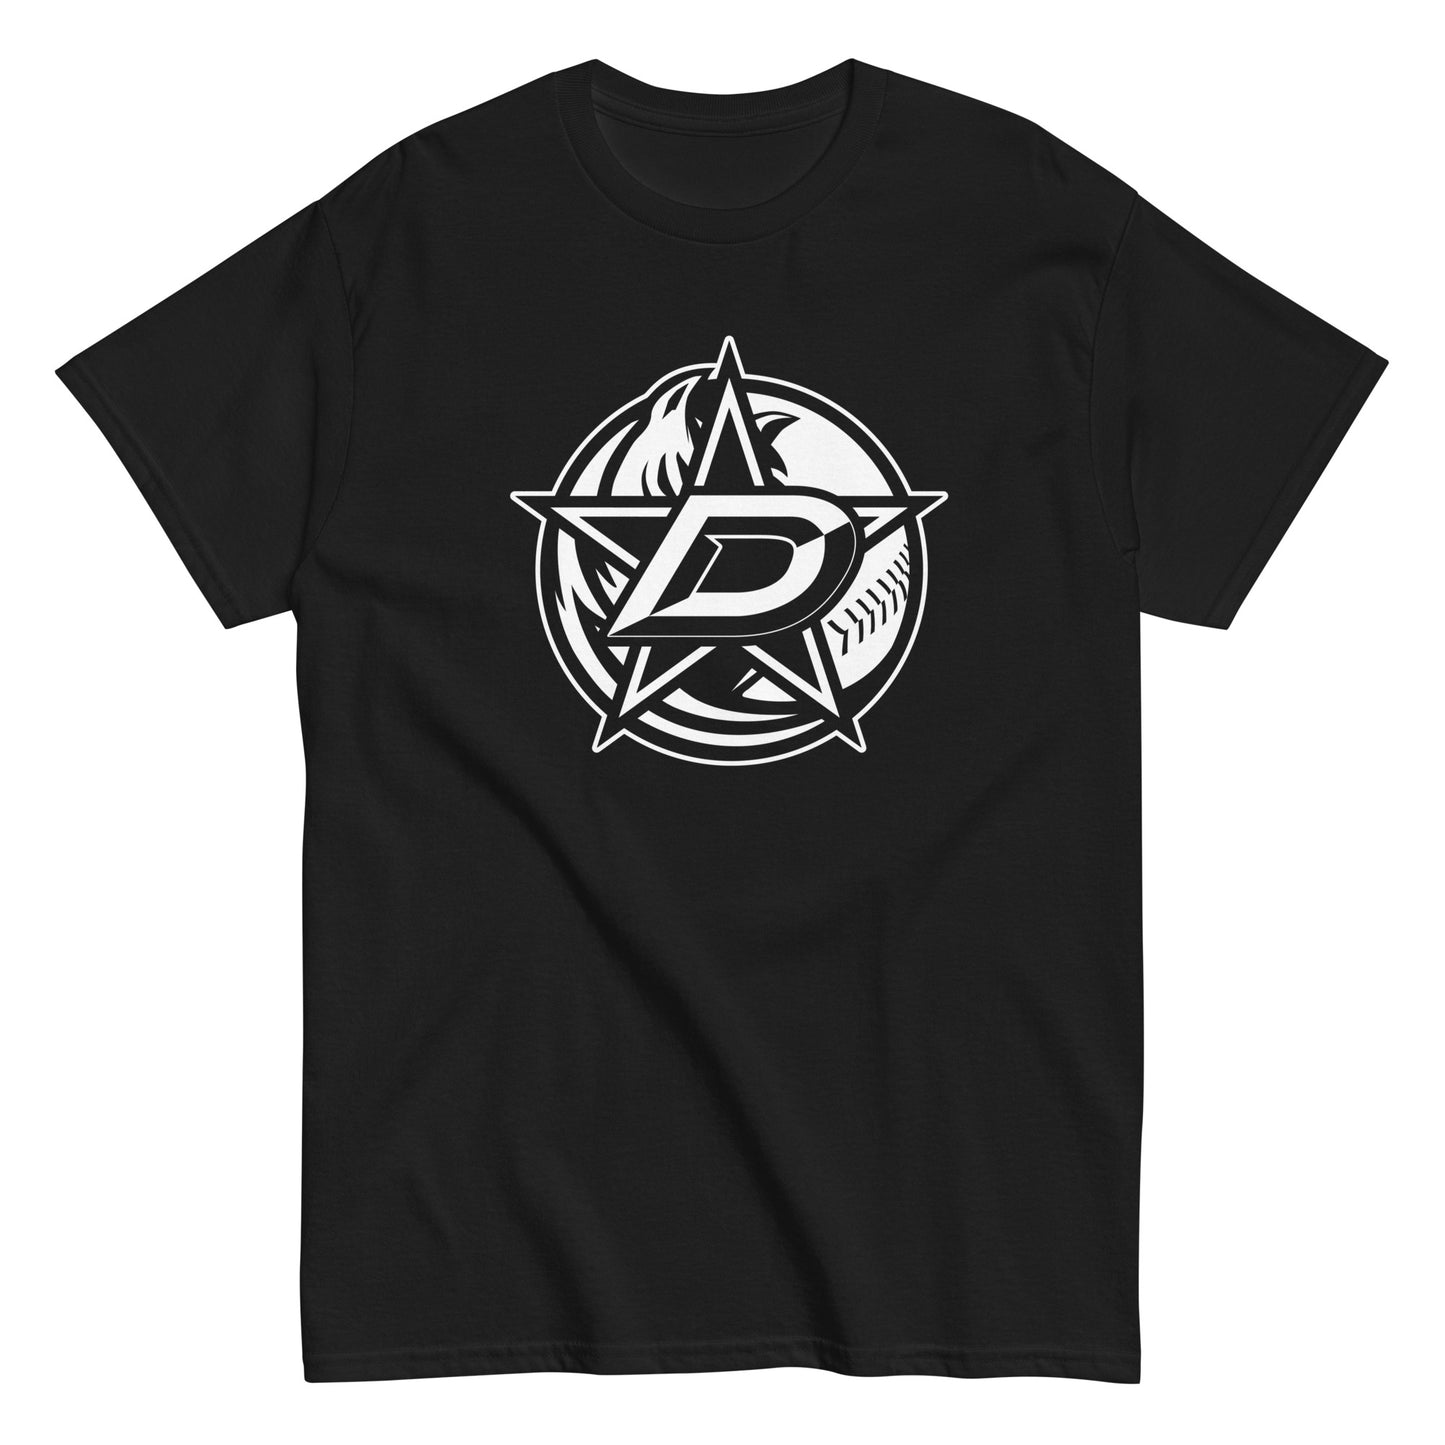 DAL Tee - 1 Color